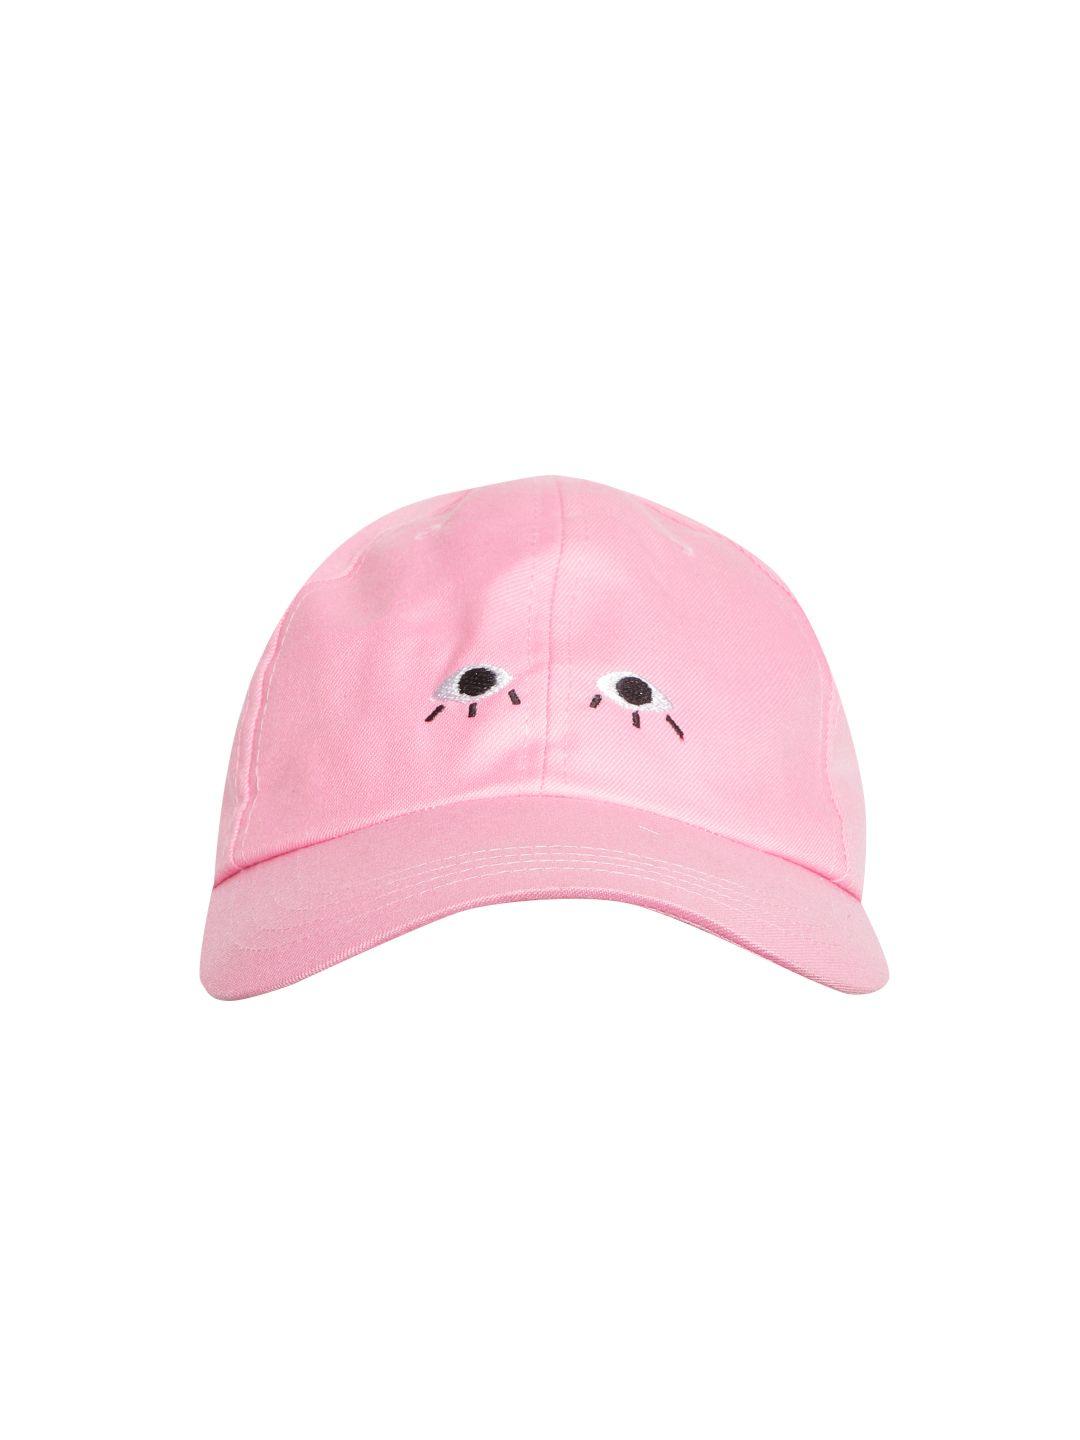 blueberry unisex pink embroidered baseball cap